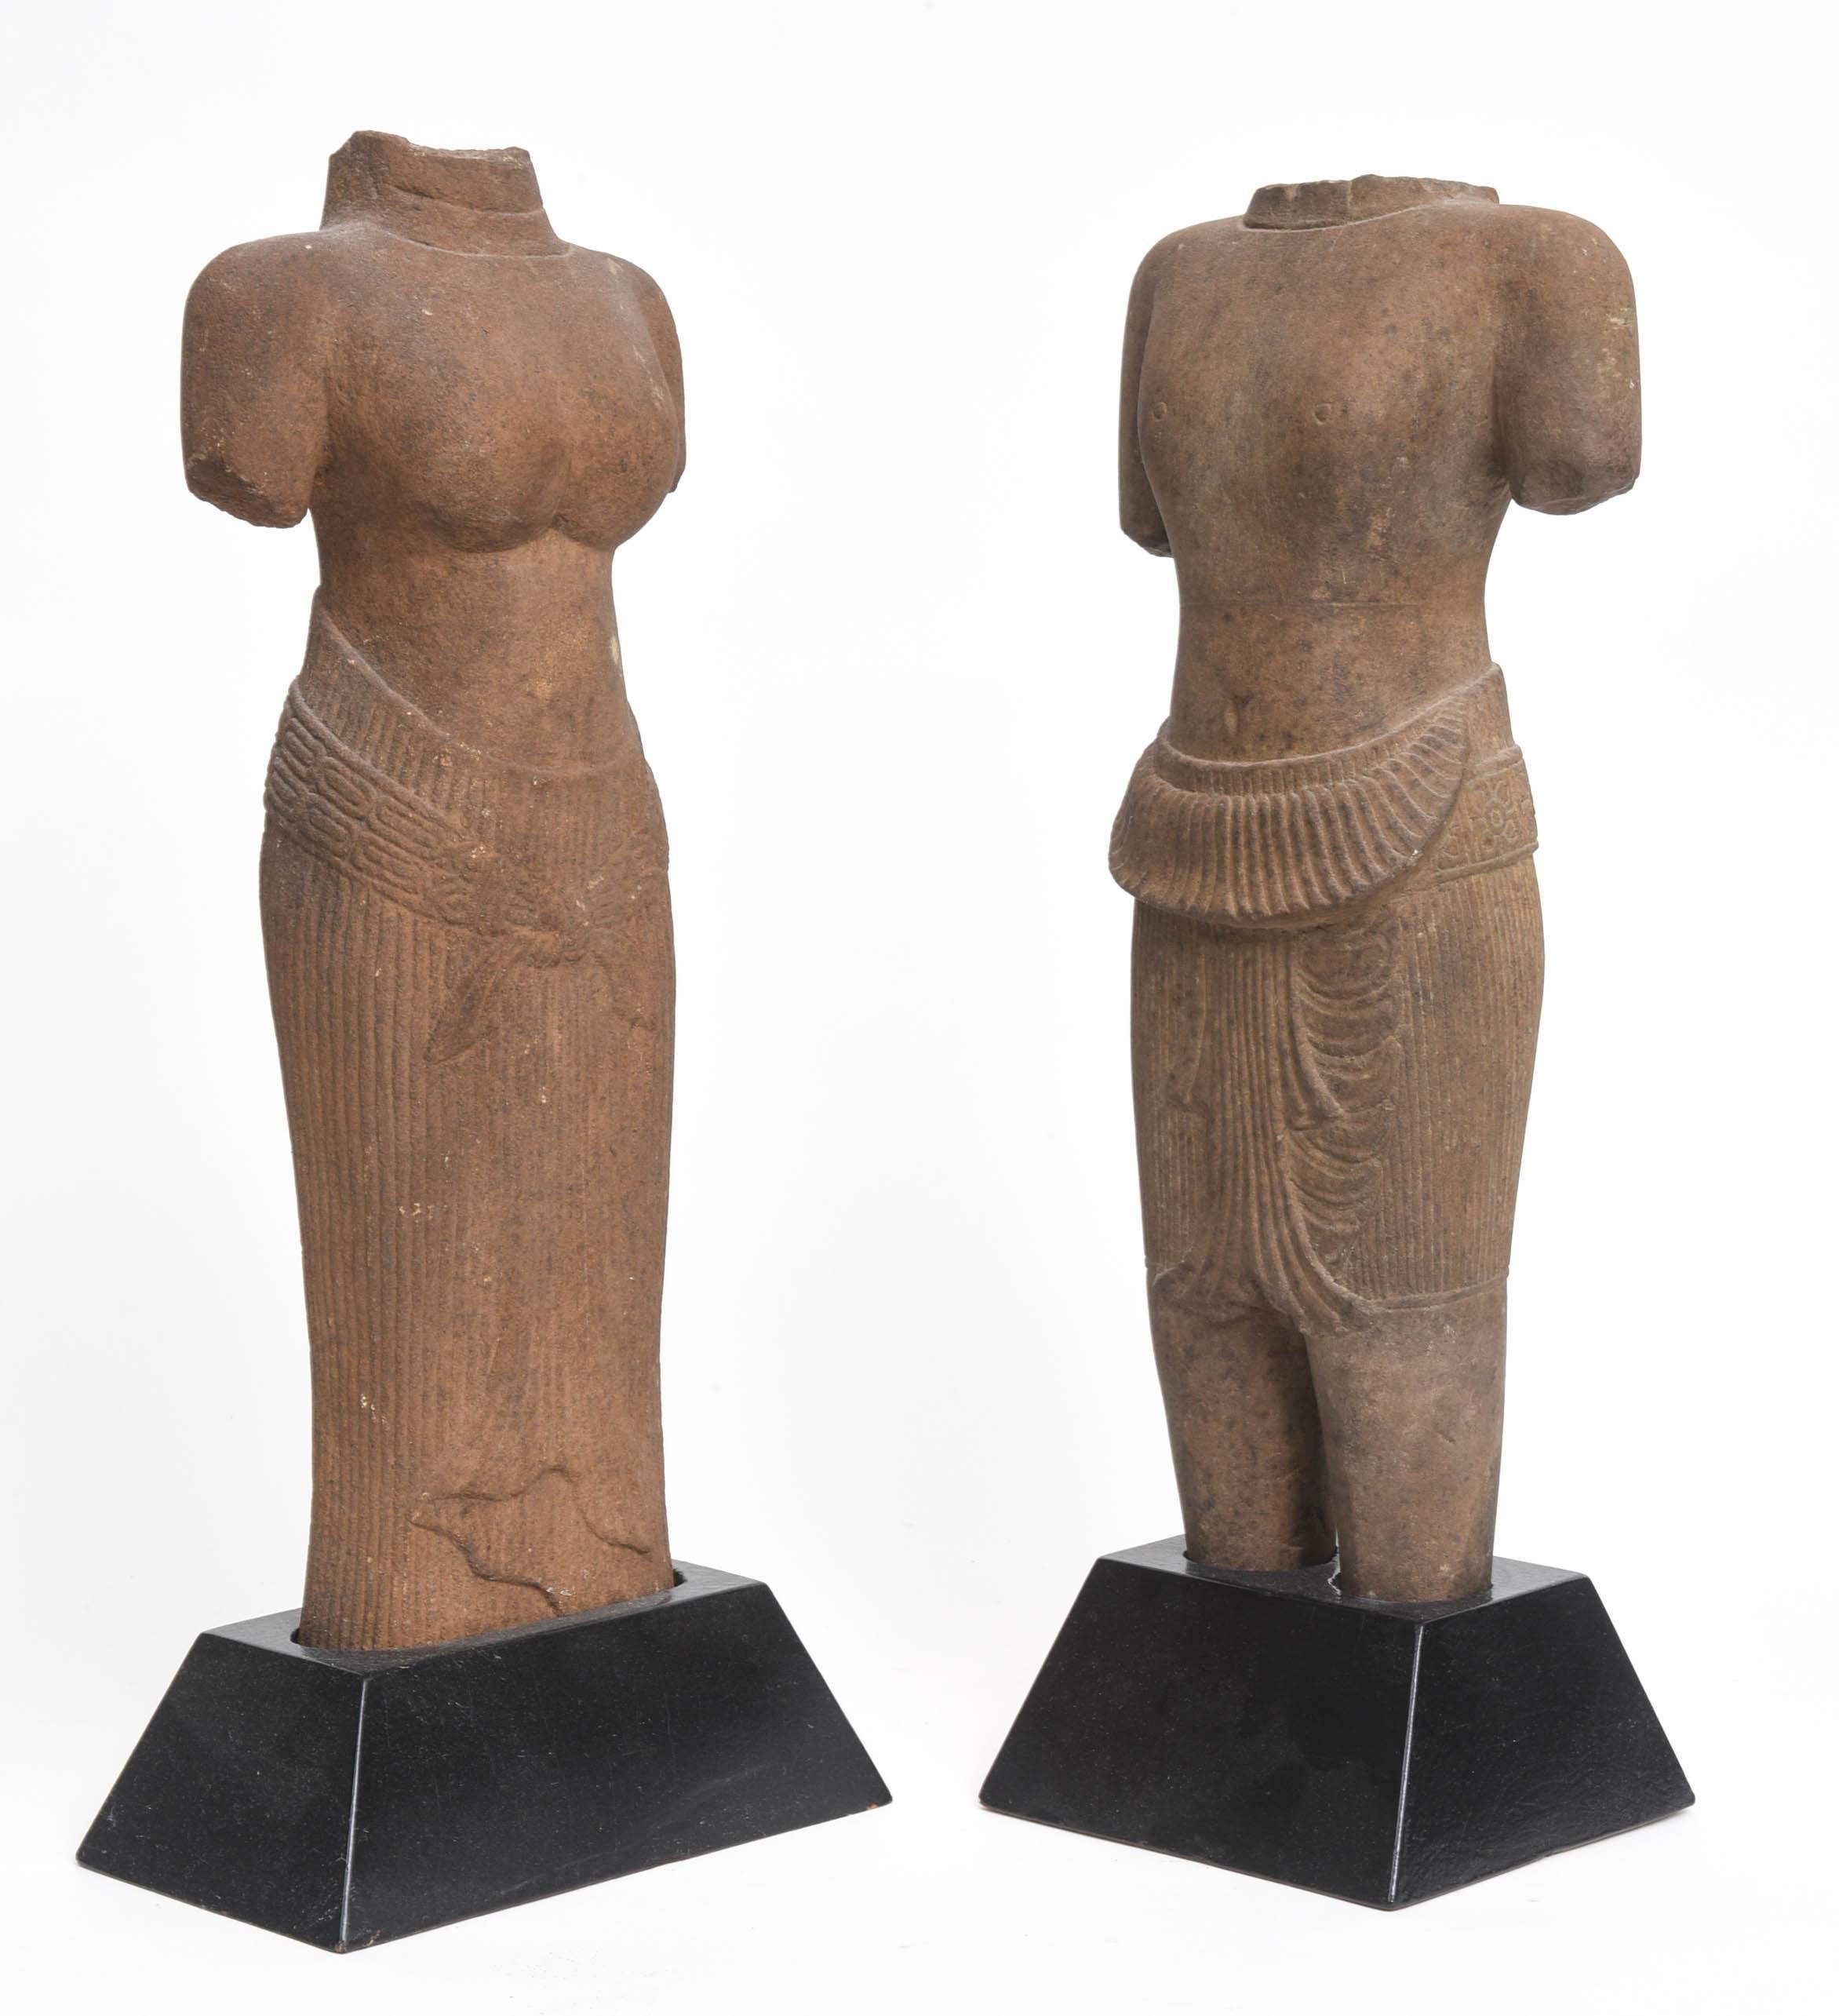 Finely carved 11th century, Baphuon Style,  Khmer, Angkor Wat period sandstone full-length torsos of two Hindu deities standing in typical postures, probably Uma Parvati and Vishnu.  He is wearing a vertically striated sampan held together with a